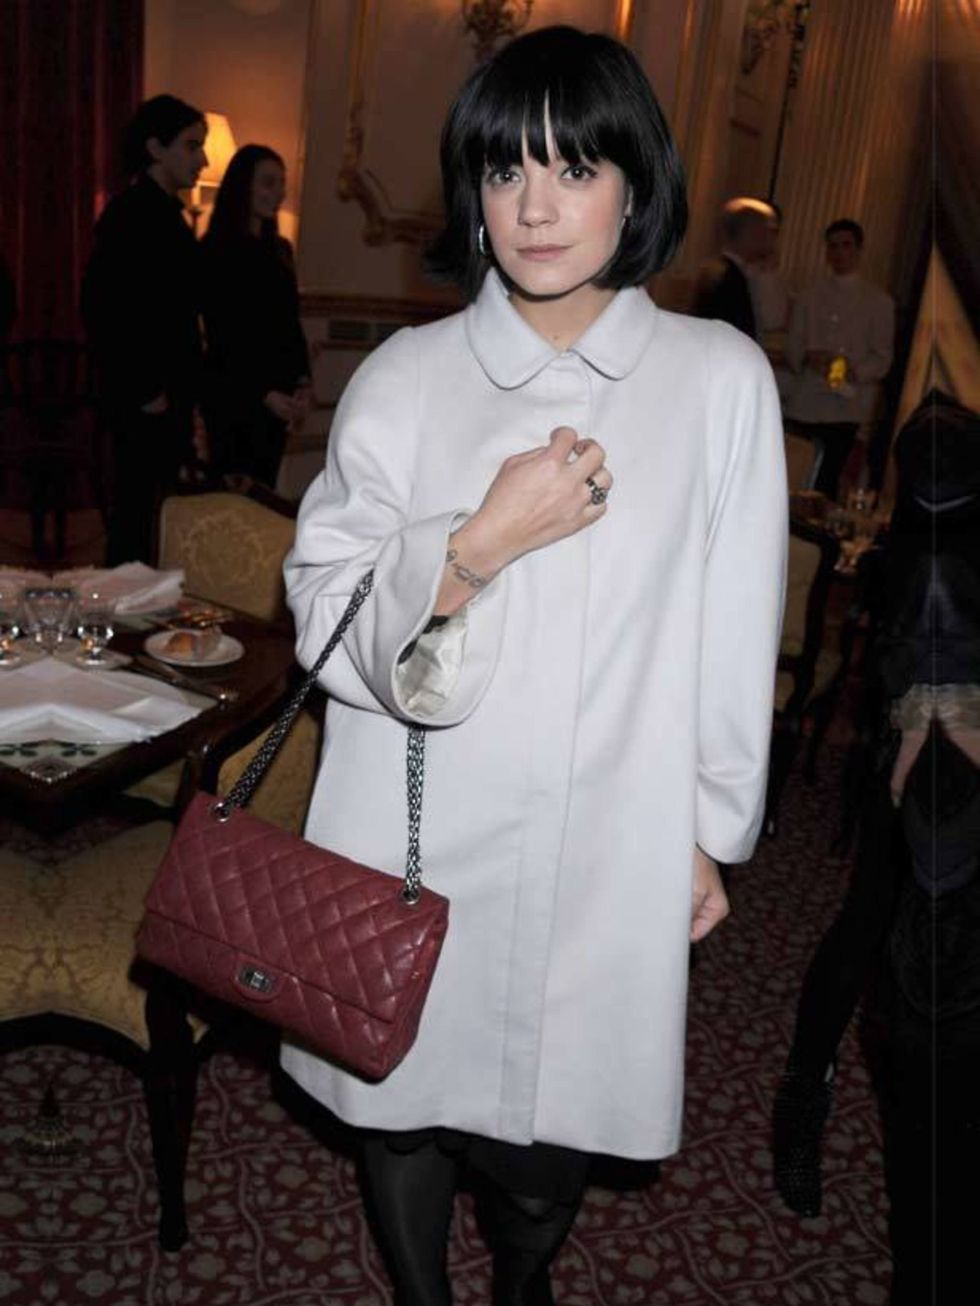 <p><a href="http://www.elleuk.com/starstyle/style-files/%28section%29/lily-allen/%28offset%29/12/%28img%29/338898">Lily Allen</a> makes an appearance at Miu Miu's new Bond Street store opening, 3 December 2010</p>